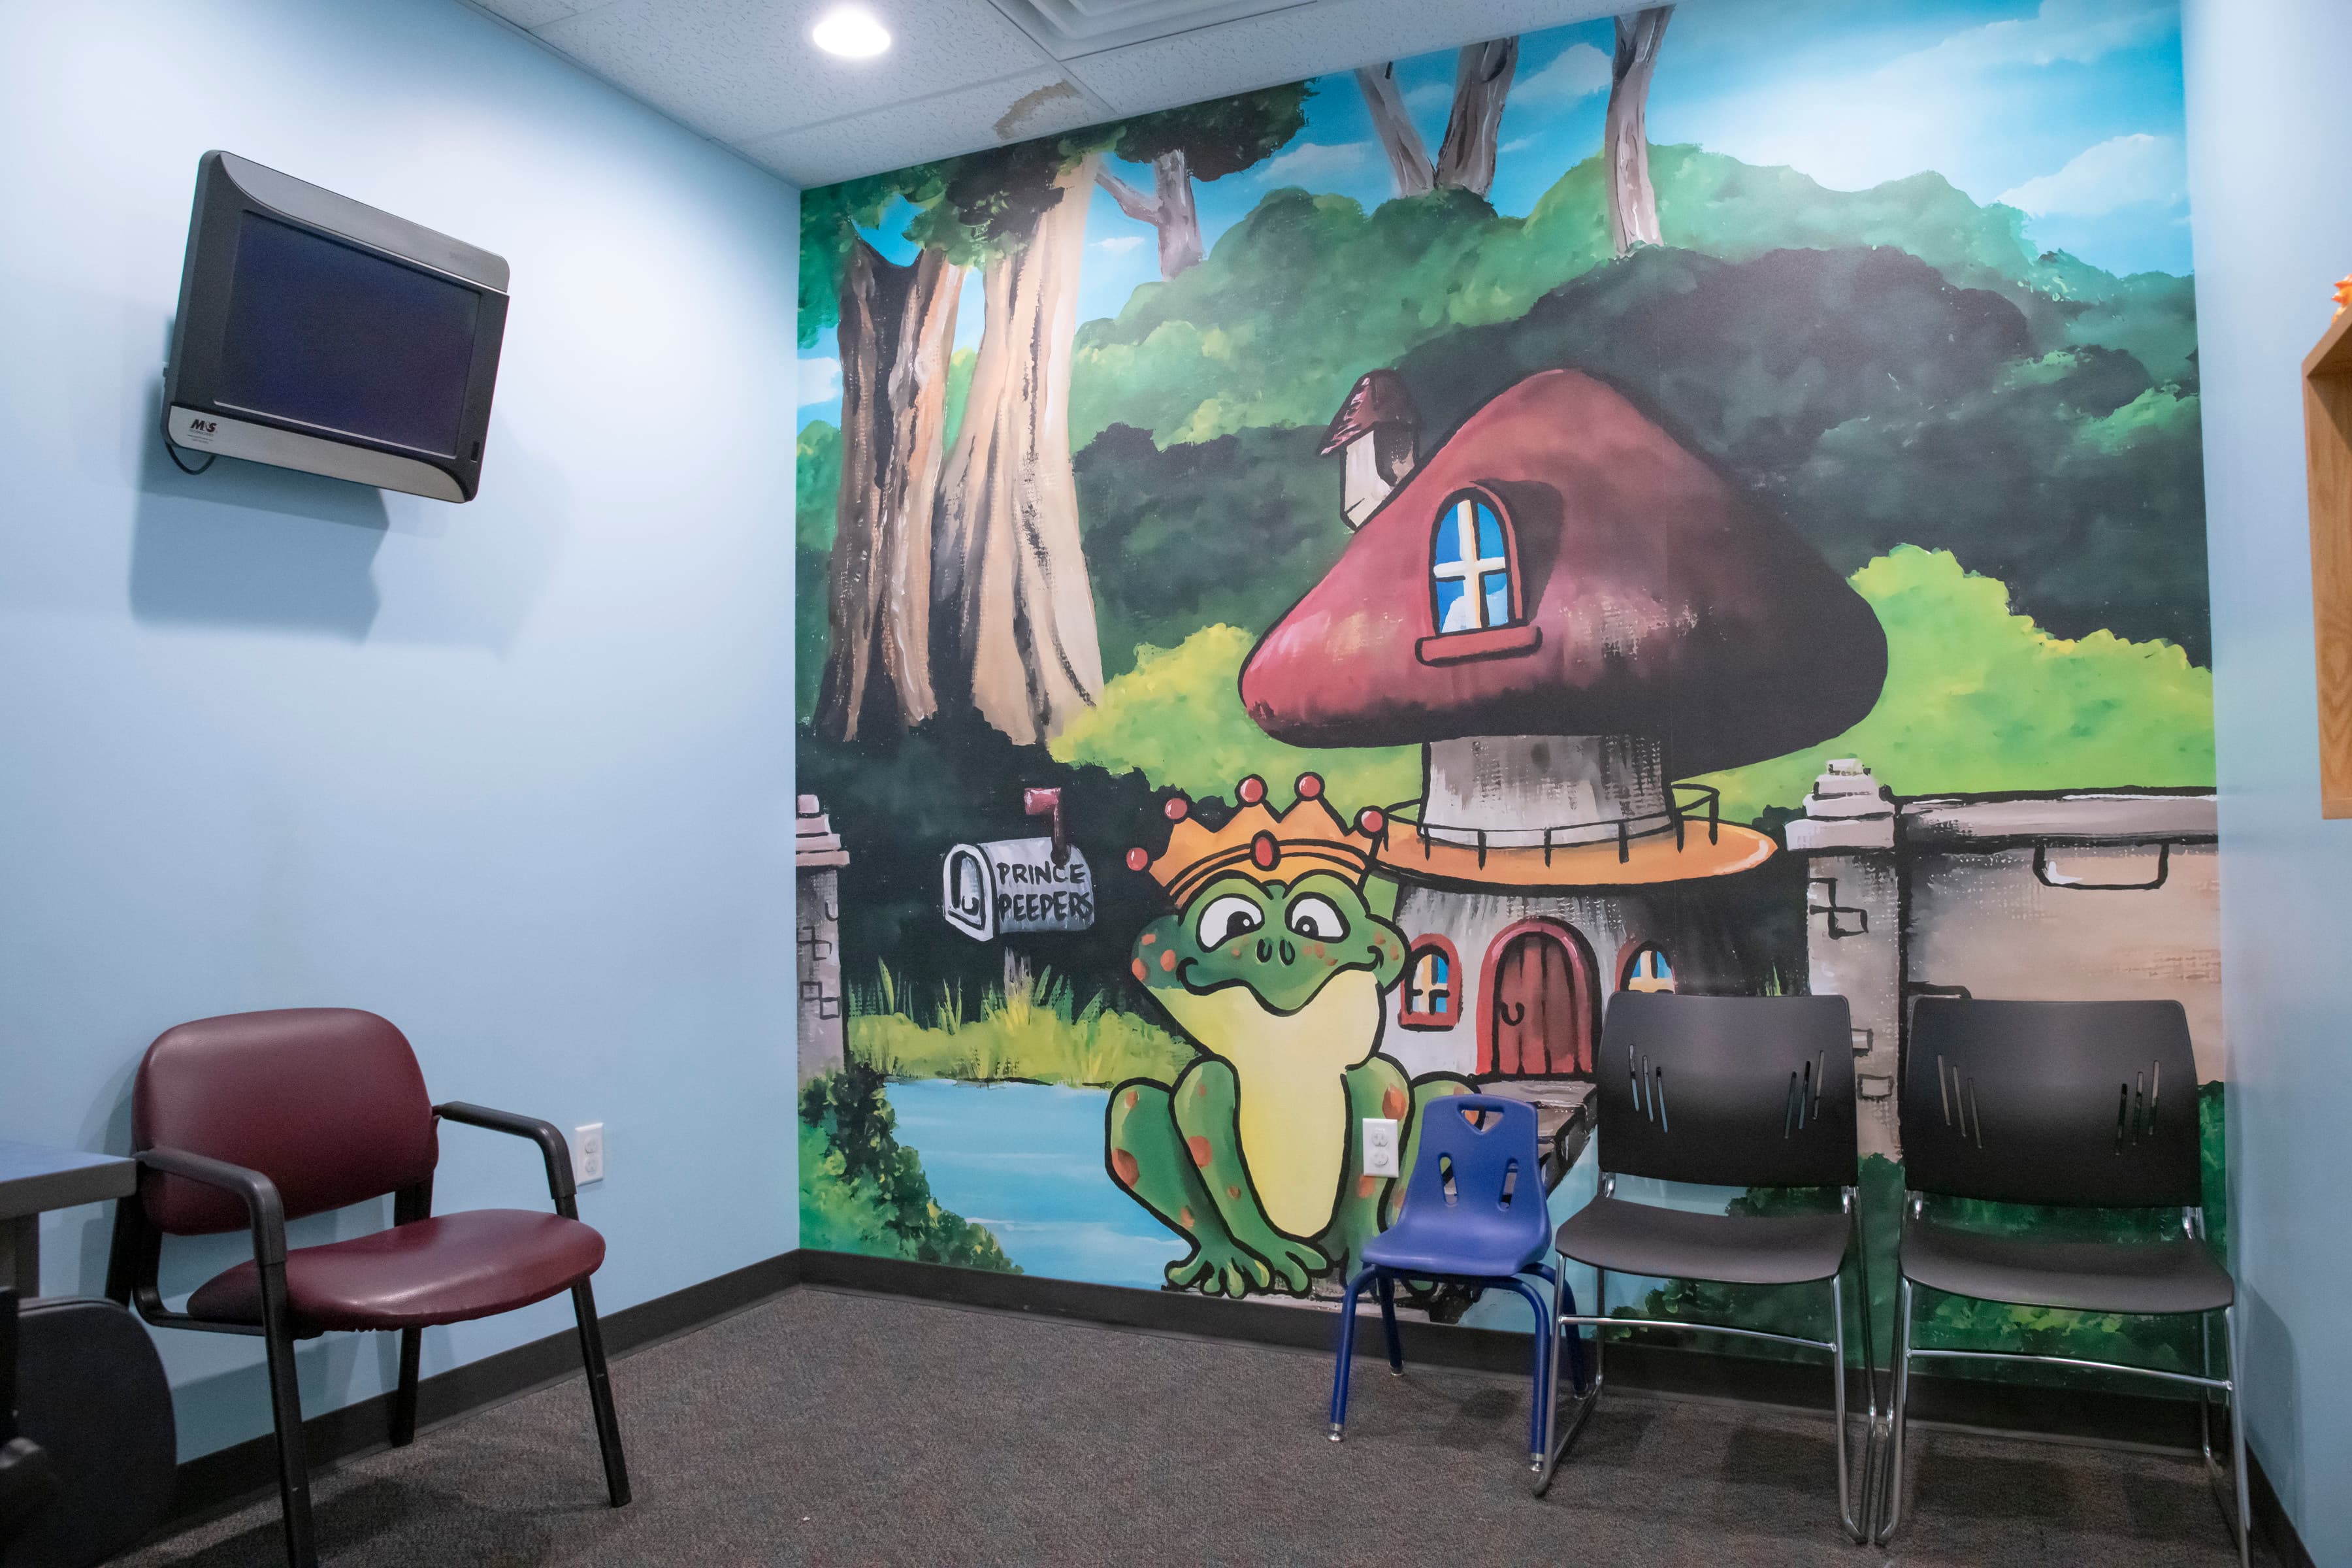 dental waiting room with a frog image painted on a wall